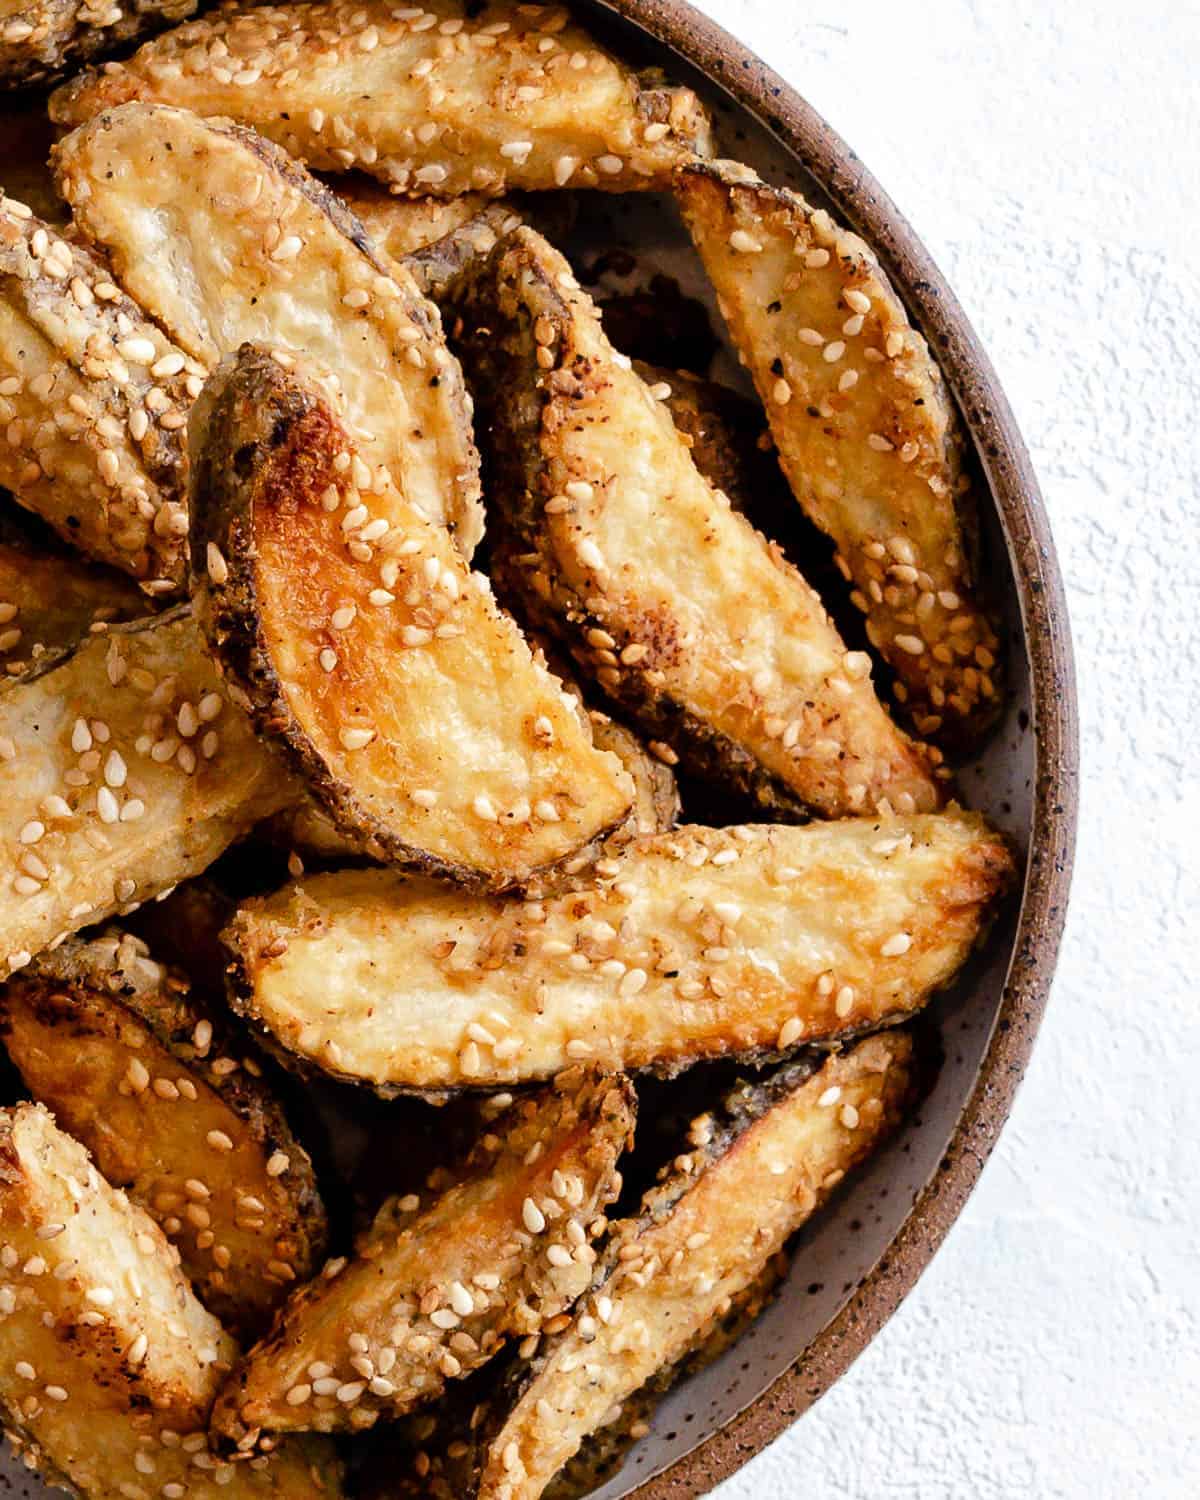 completed oven baked sesame fries on a white plate against a white background